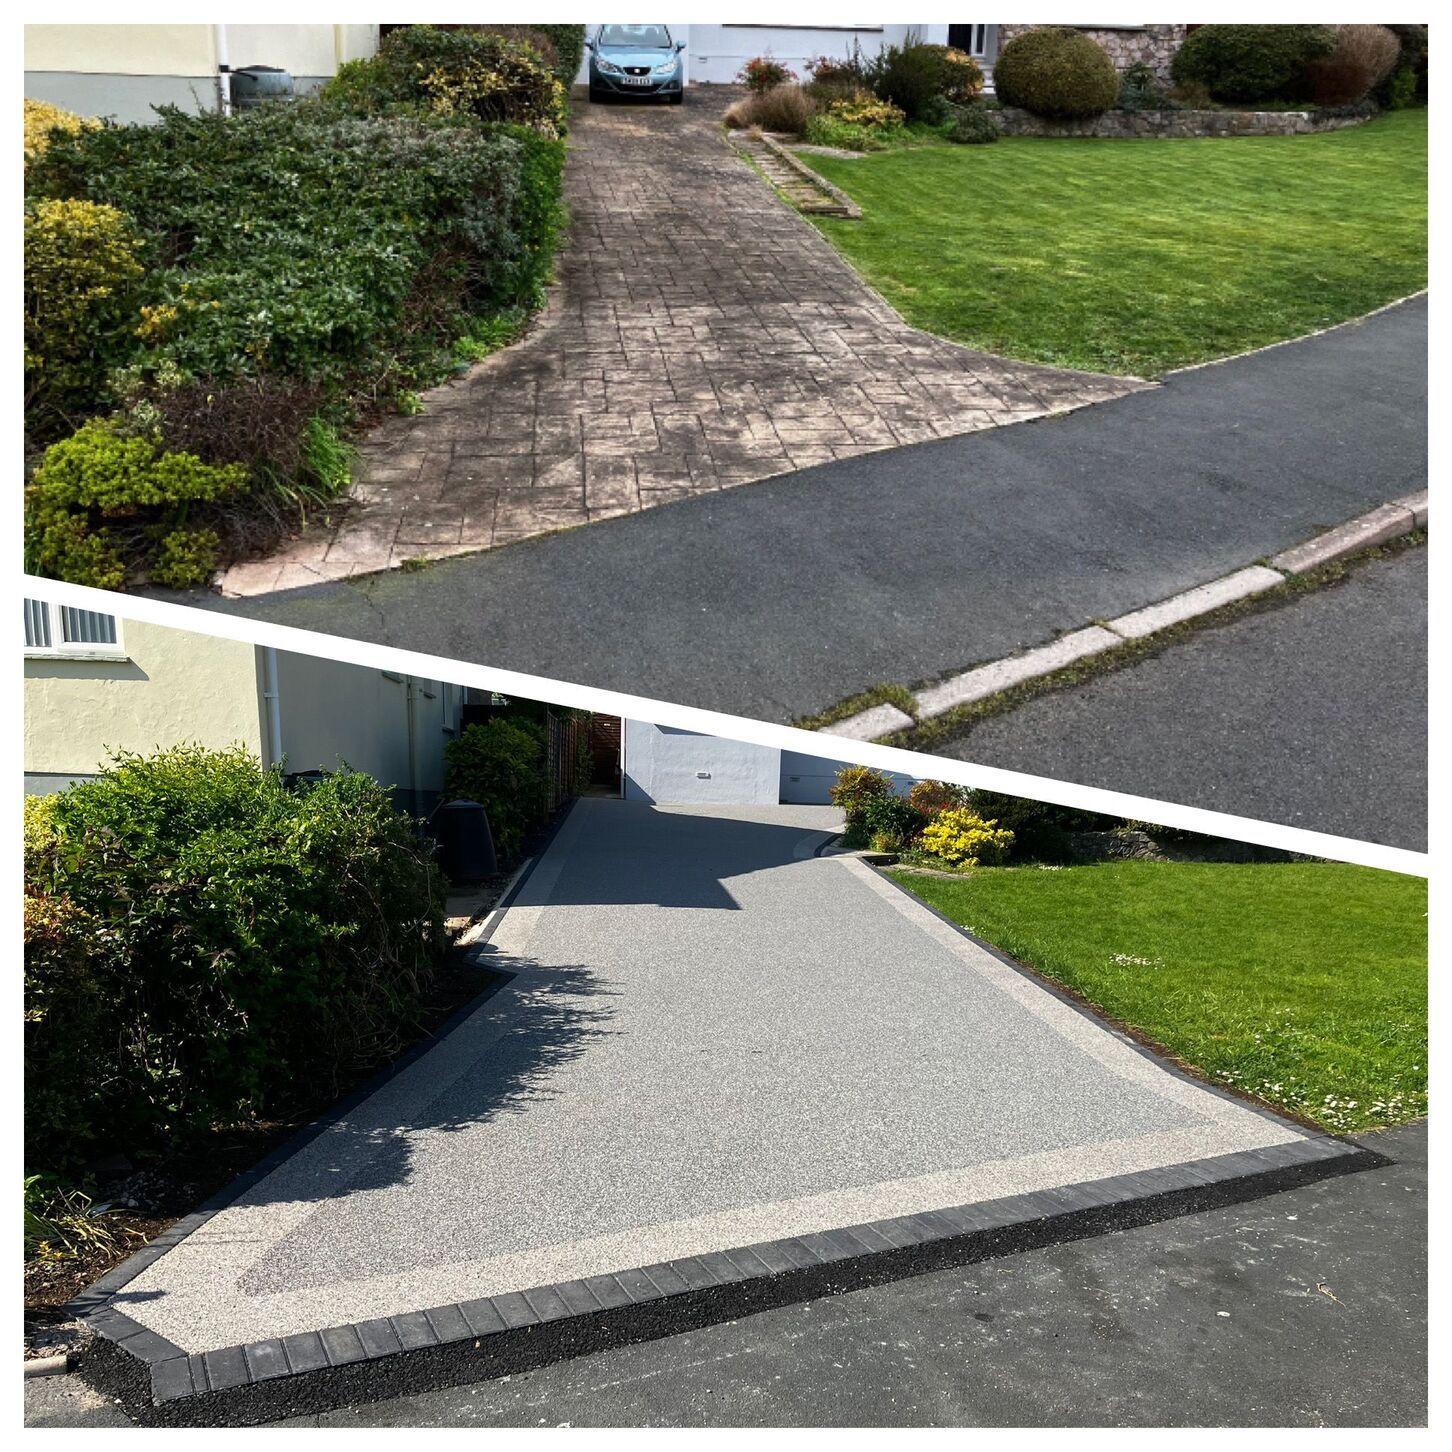 Before and after resin driveway transformation photographs.